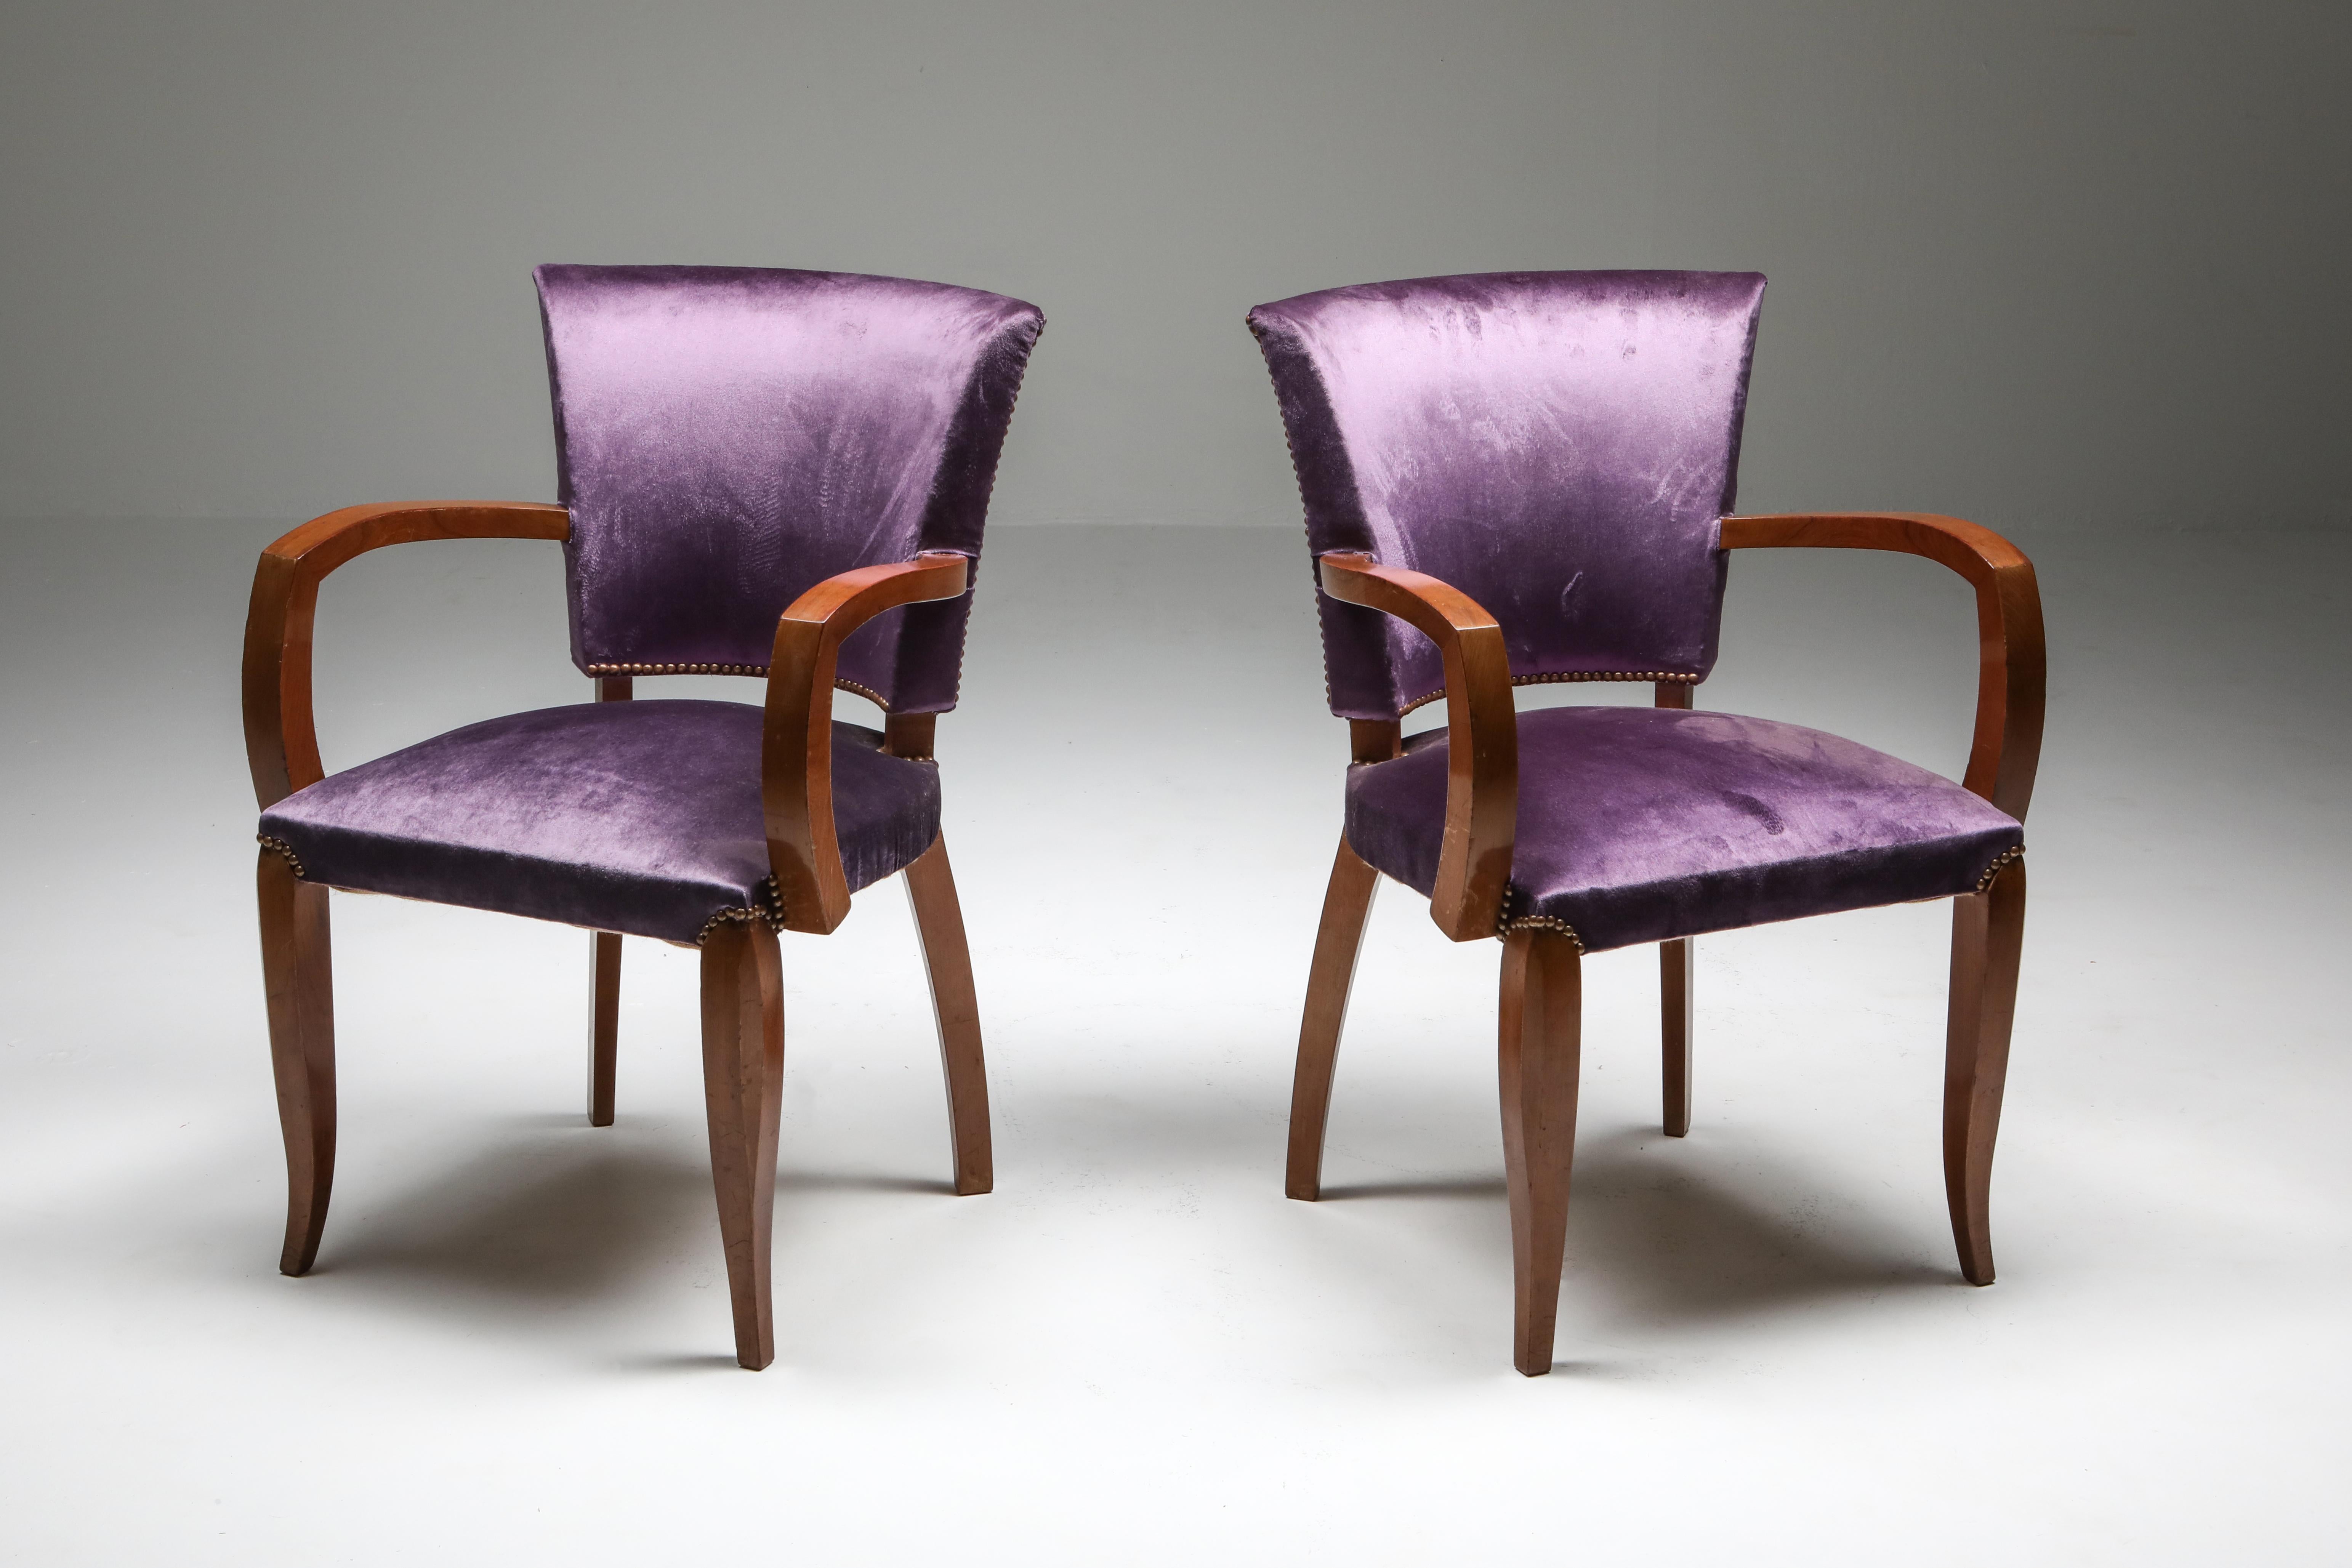 Art Deco armchairs, style Jules Leleu, France, 1940s
A solid mahogany frame and lilac velvet upholstery make these a perfect set to be used at a desk or as corner table chairs
would fit well in a Jean-Charles Moreux, Ruhlmann, Arbus or Jean Royère